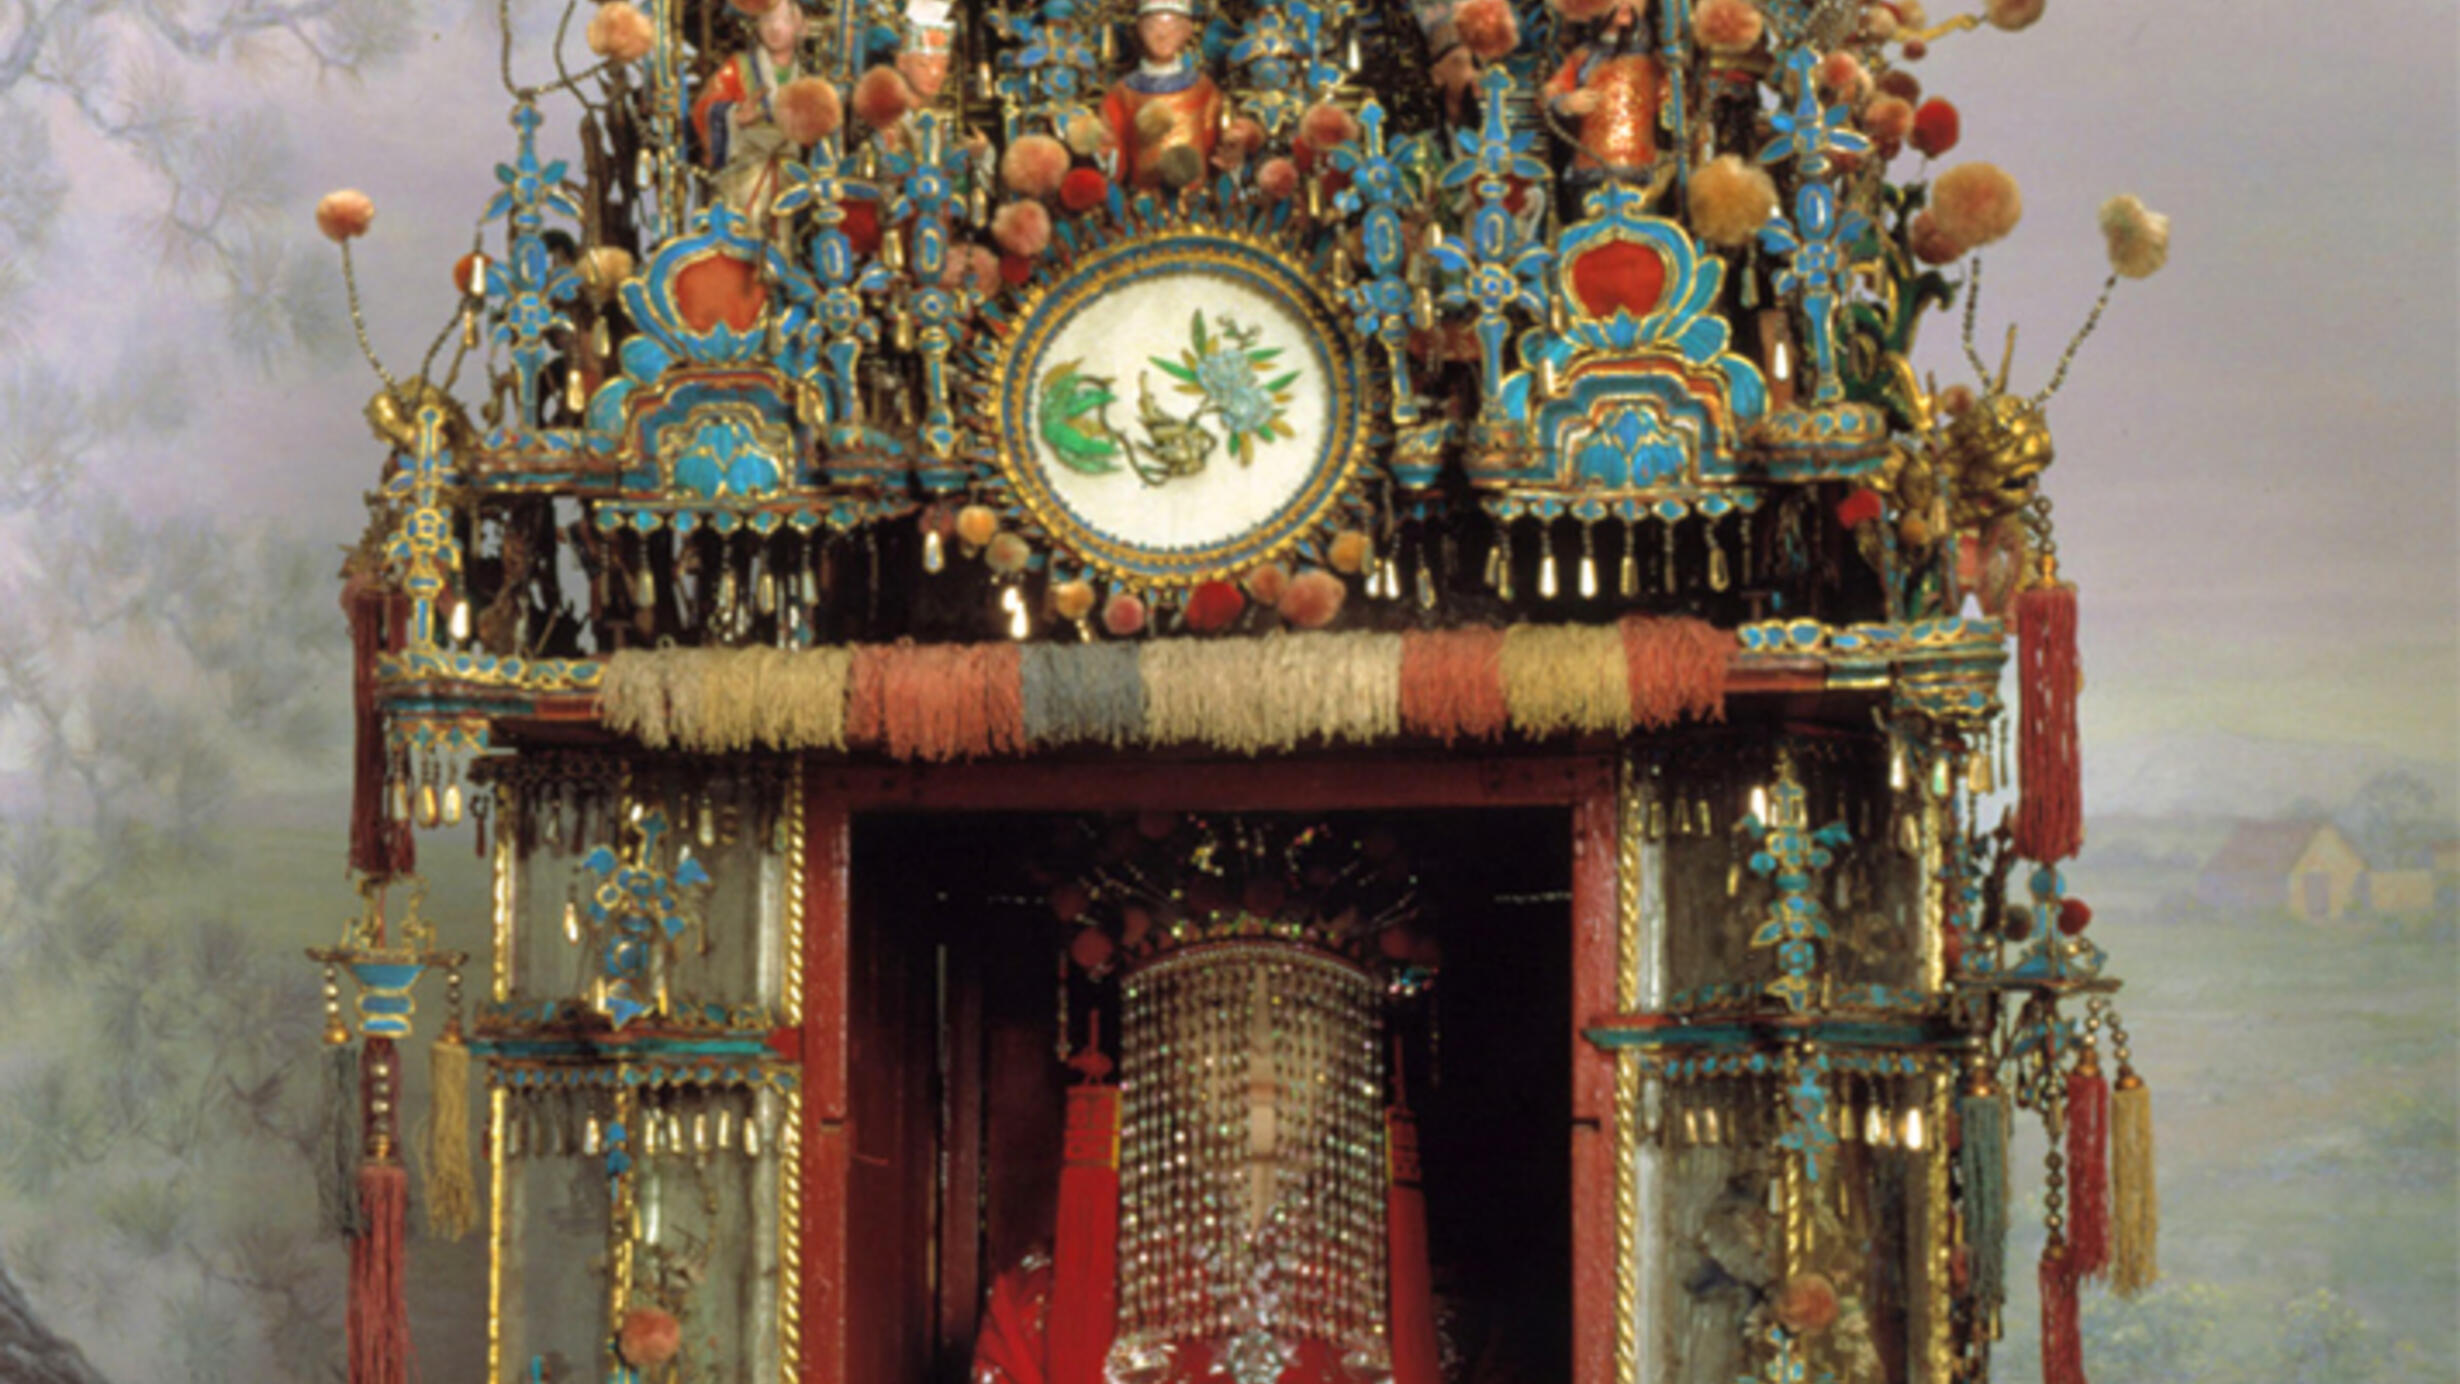 Upper part of elaborately decorated litter used to carry Chinese bride. The model seated inside wears beaded veil and costume.